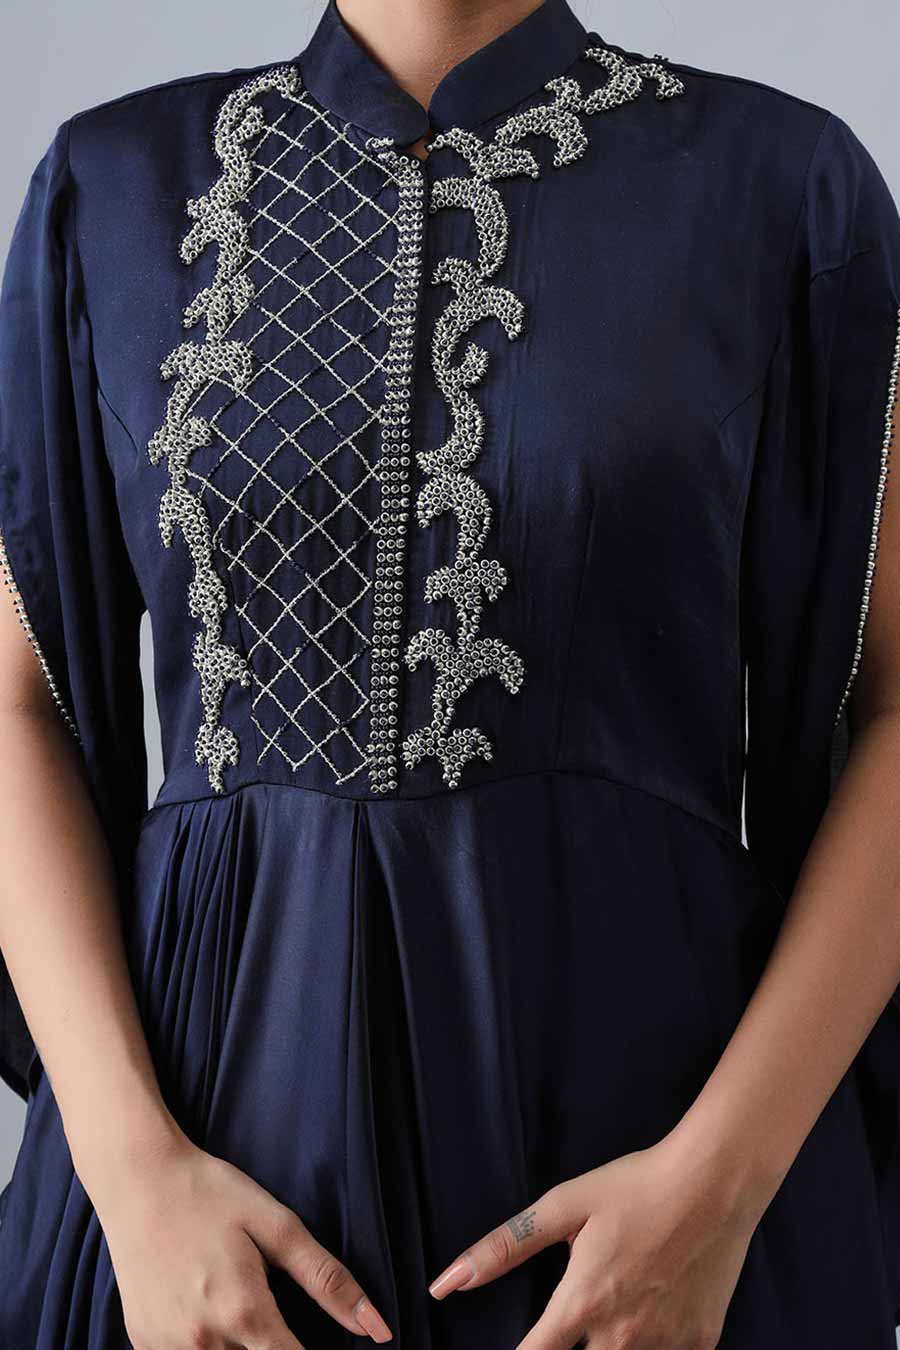 Navy Blue Embroidered Pleated Gown